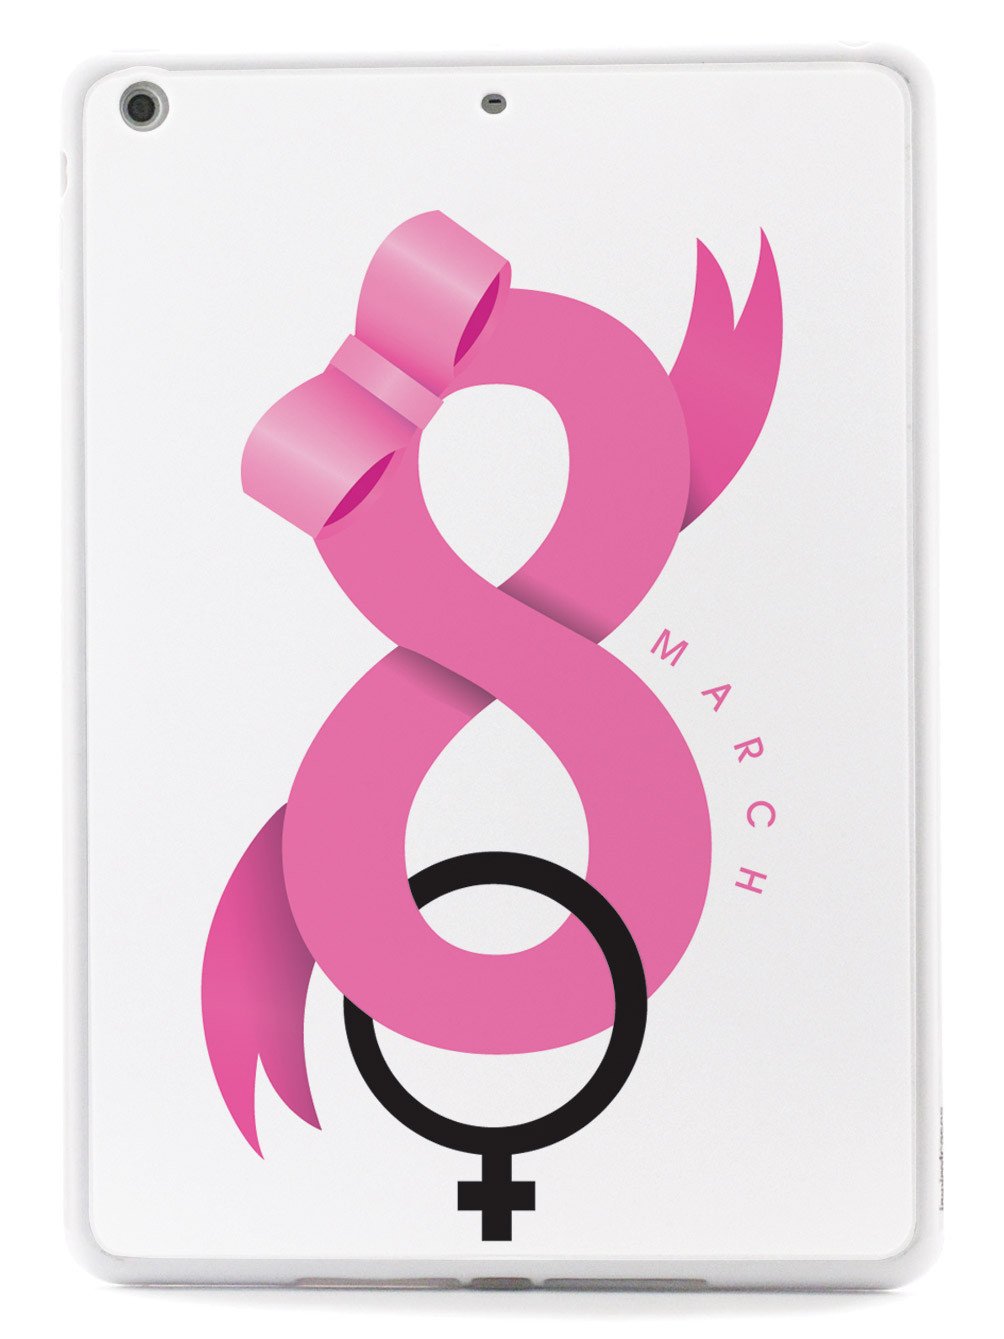 Women's Day - March 8 - Pink Ribbon Case